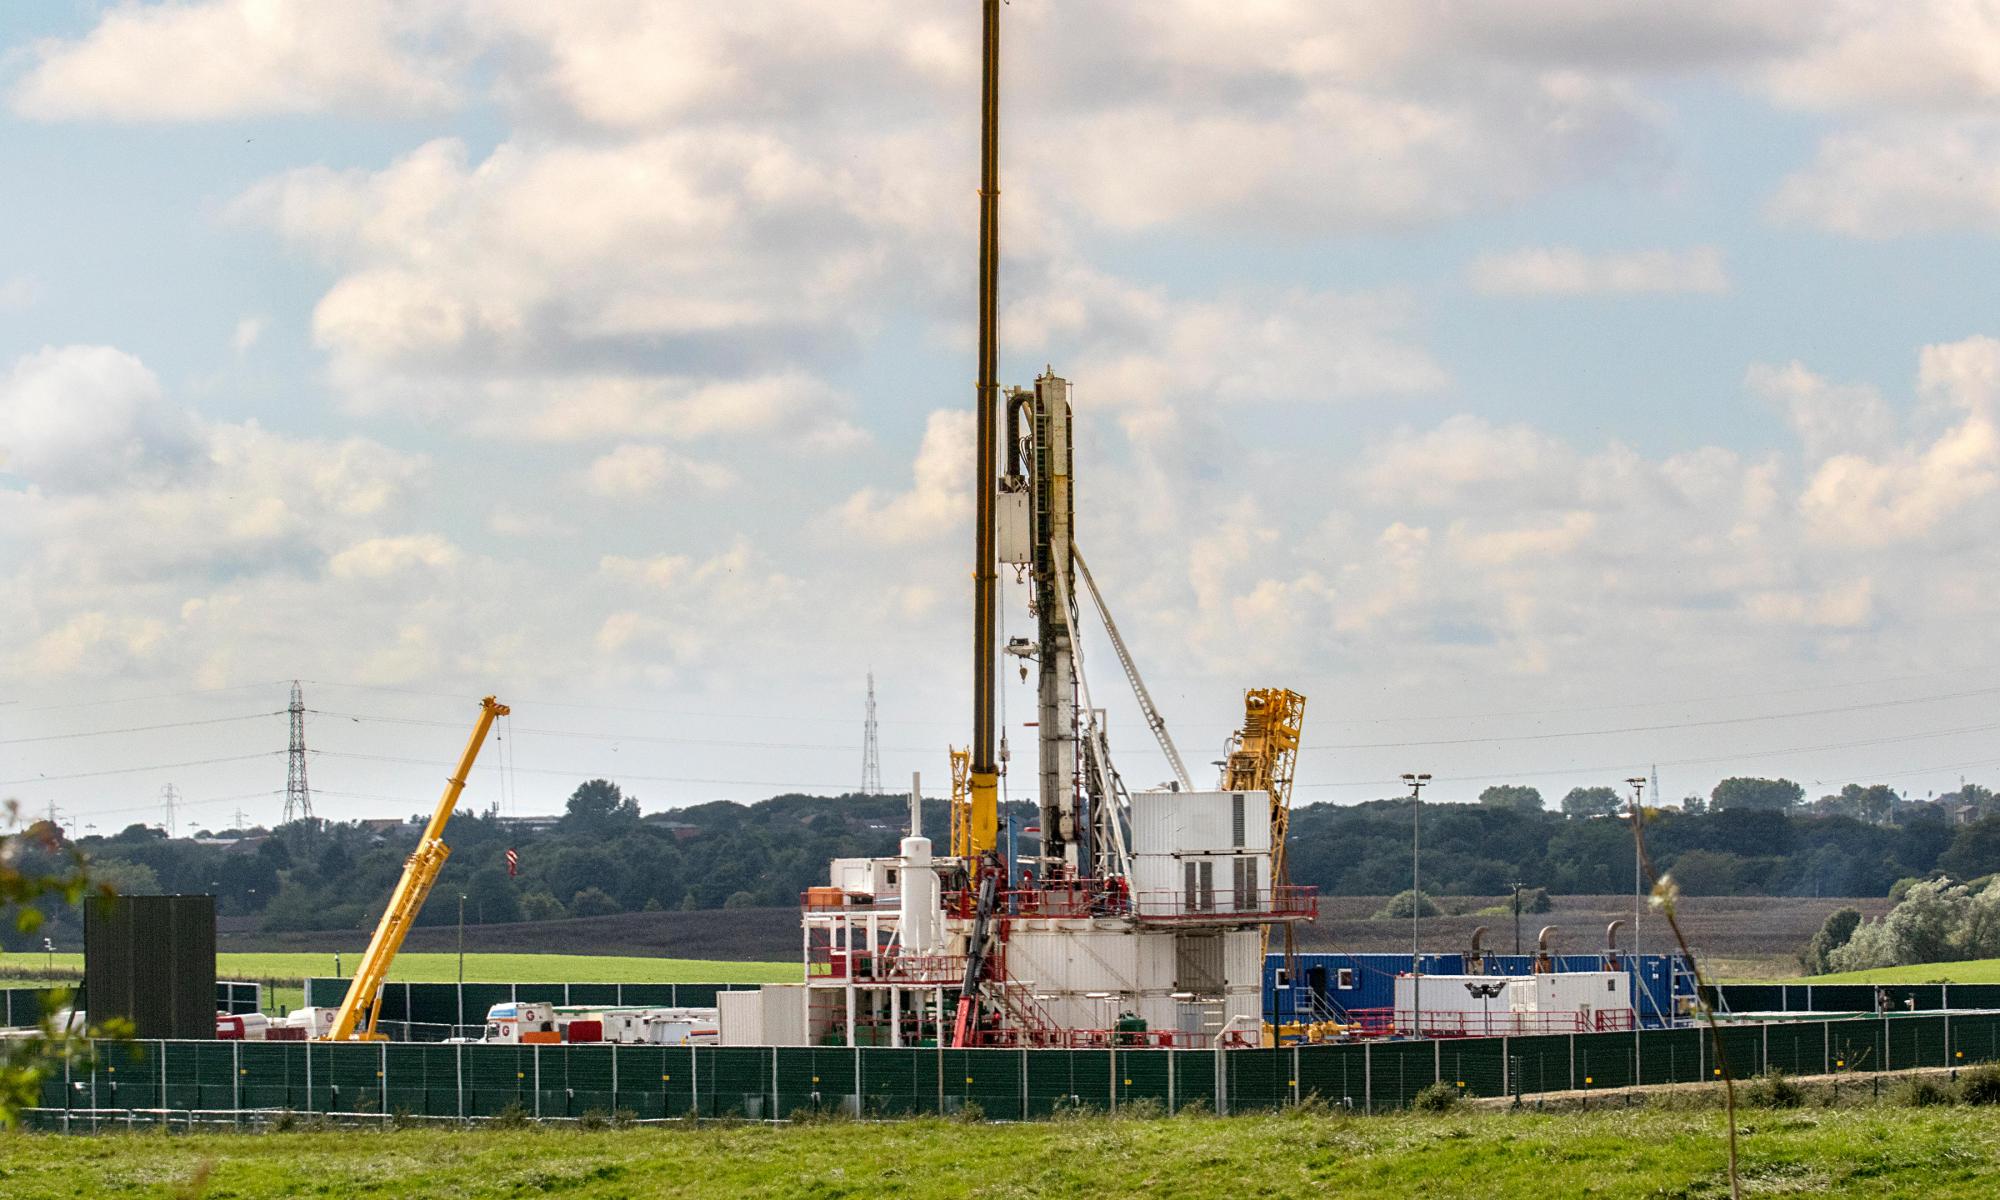 Dangers posed by fracking and oil drilling | Letter